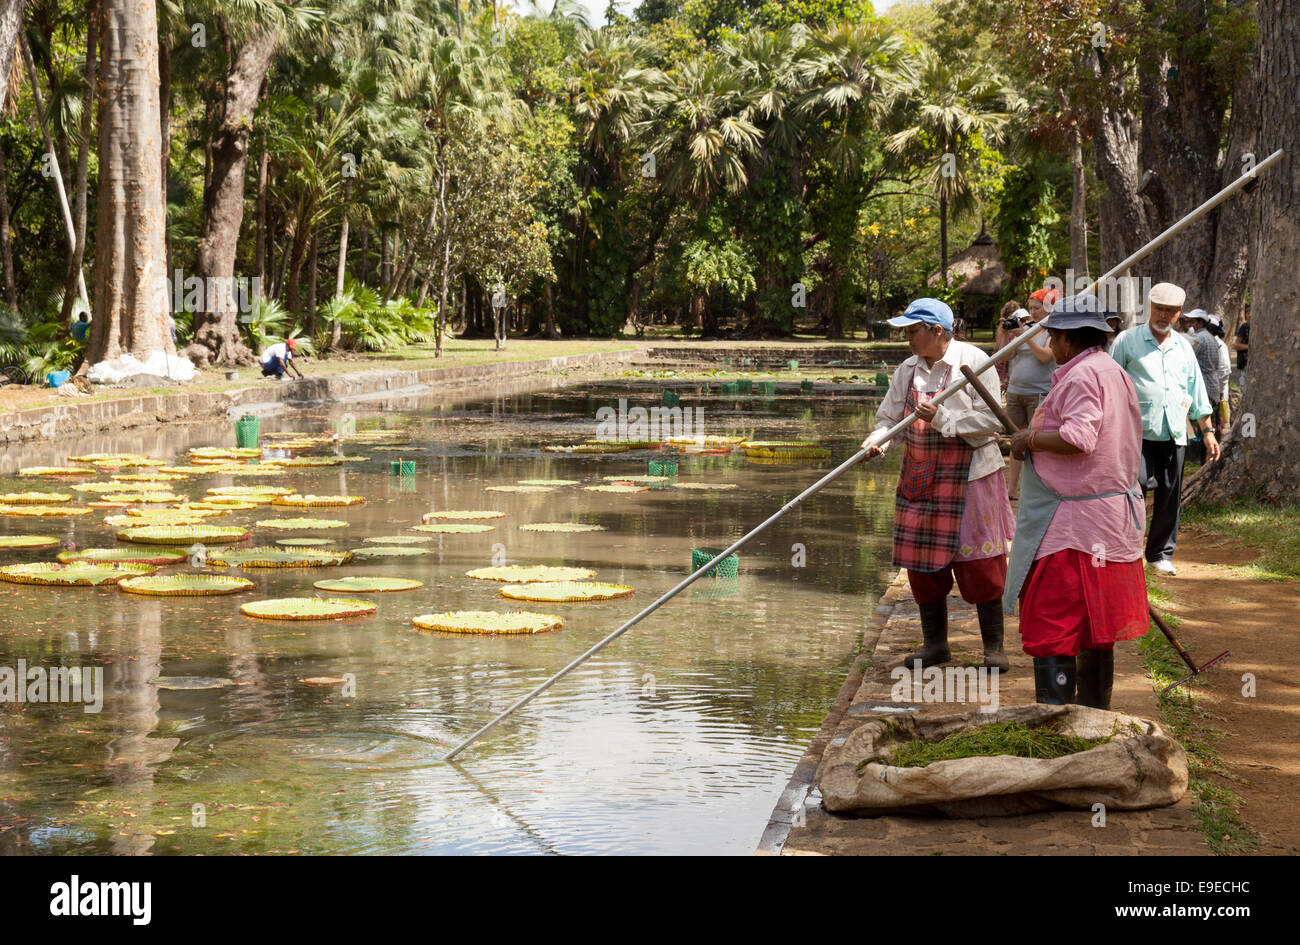 Local Mauritian women workers removing the algae from the lily pond, The Sir Seewoosagur Ramgoolam Botanical Gardens, Mauritius Stock Photo